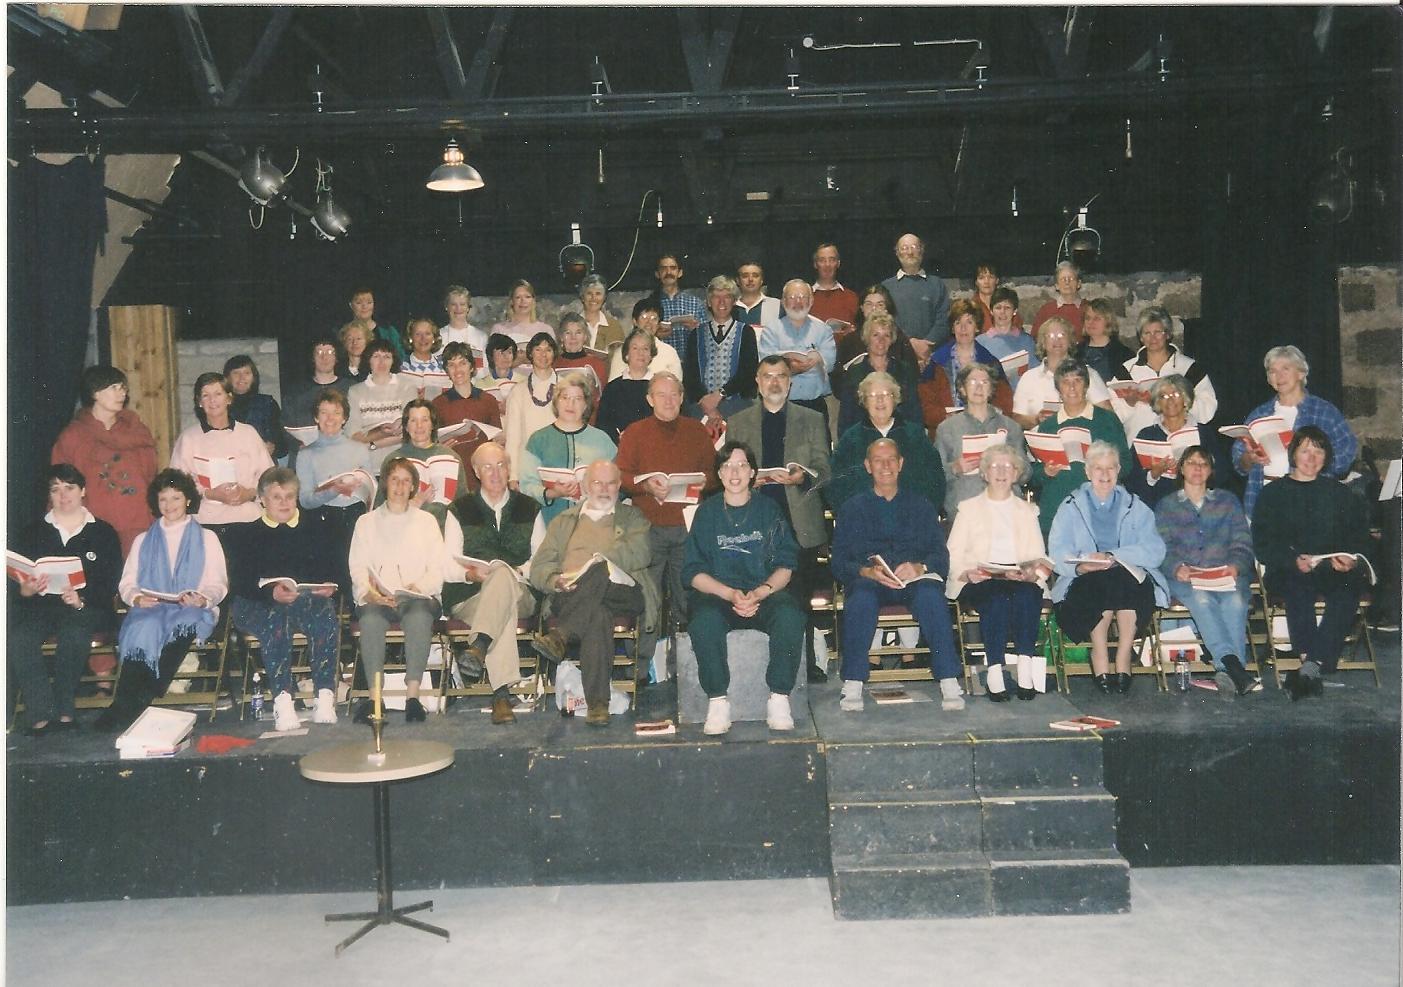 BT Voices for Hospices rehearsal Woodend Barn 2000 Hayden Creation